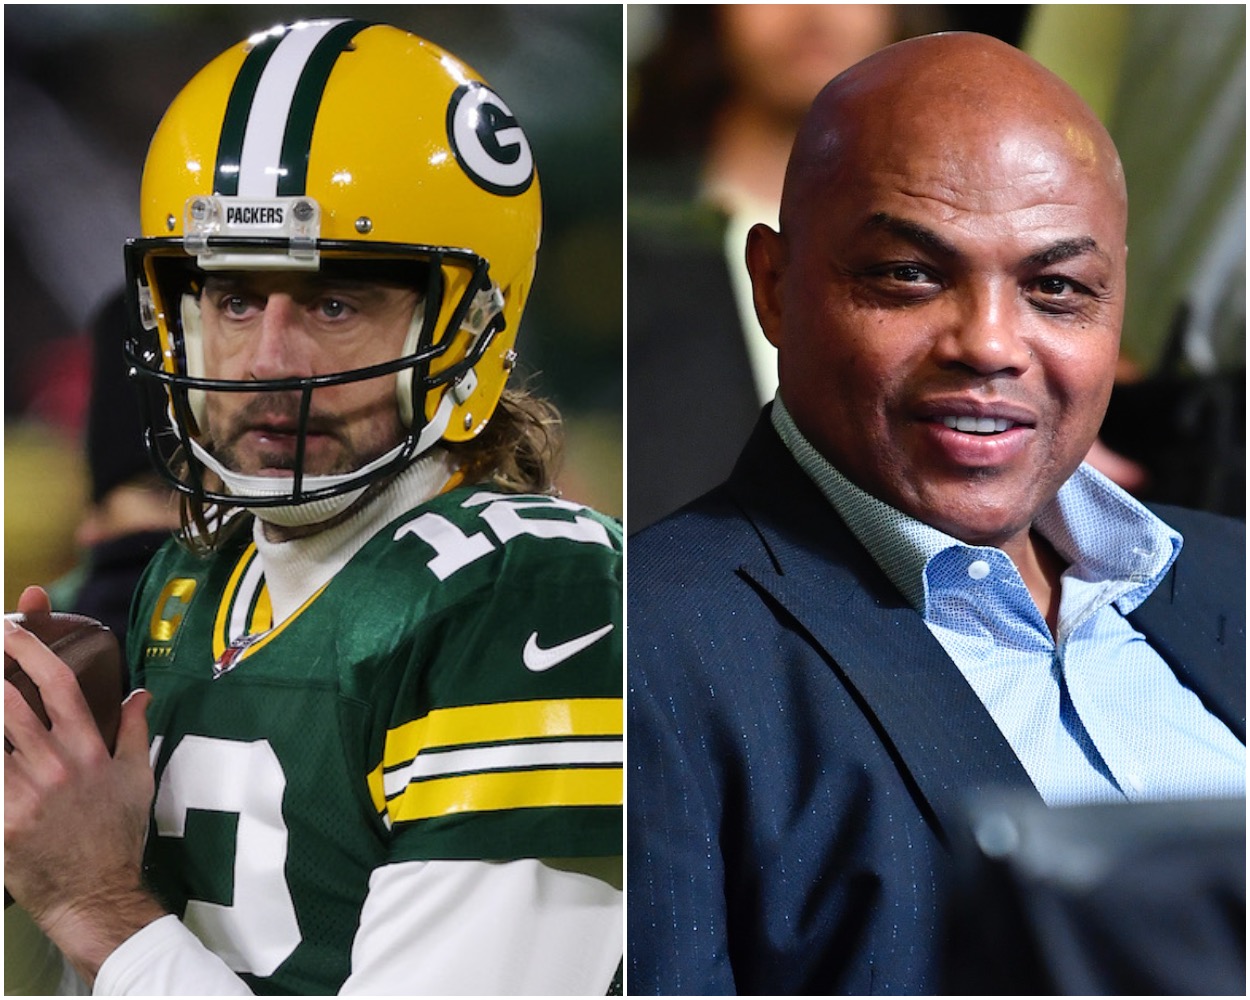 Aaron Rodgers and Charles Barkley.